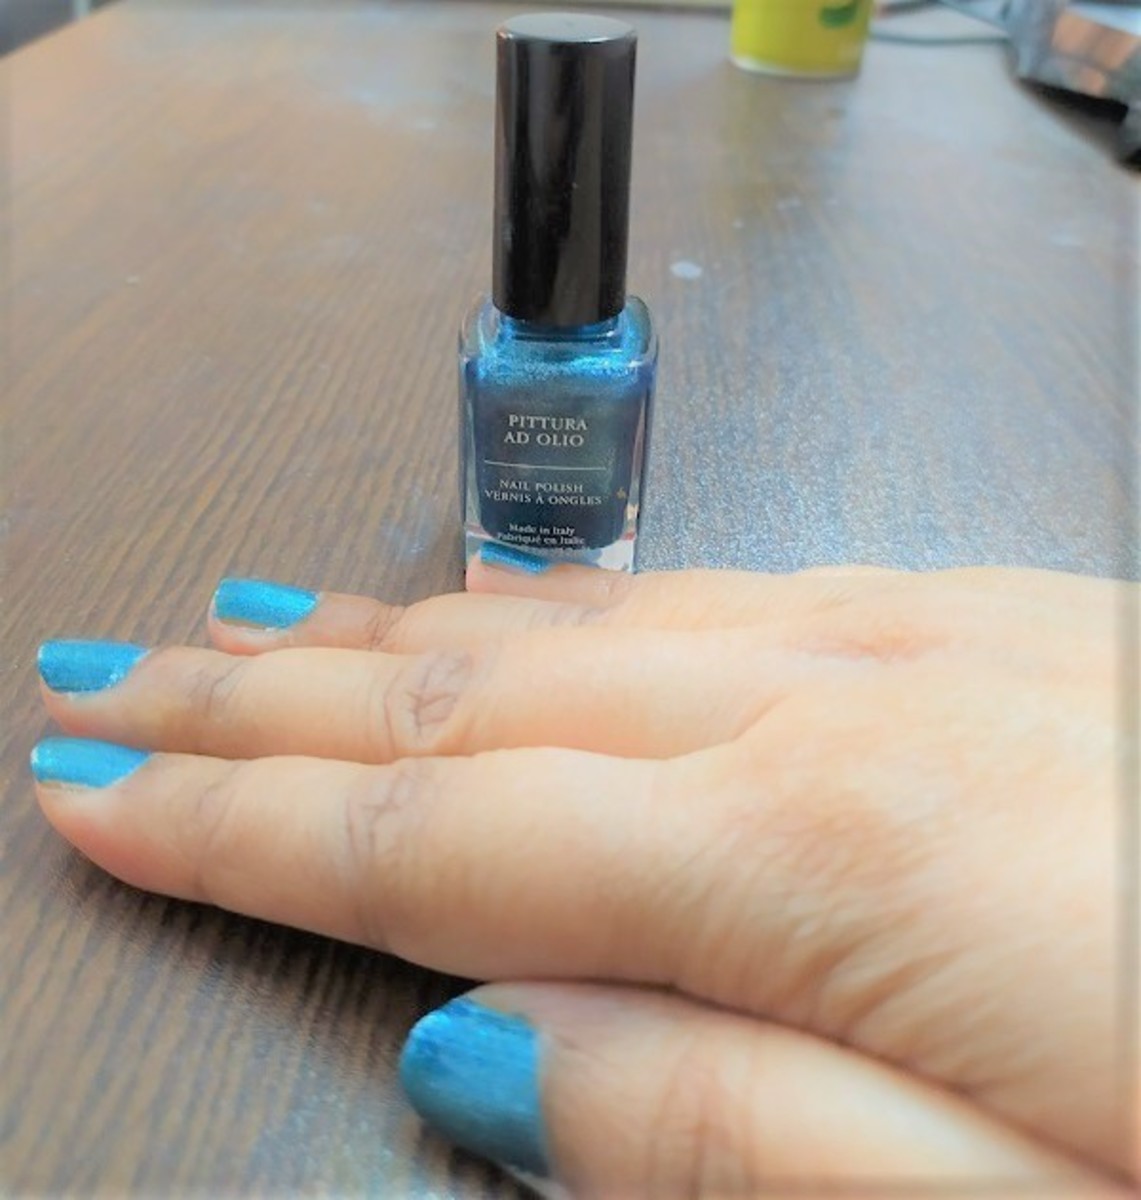 Pic: Cyan Nail Polish as one of My Previous Birthday Gifts